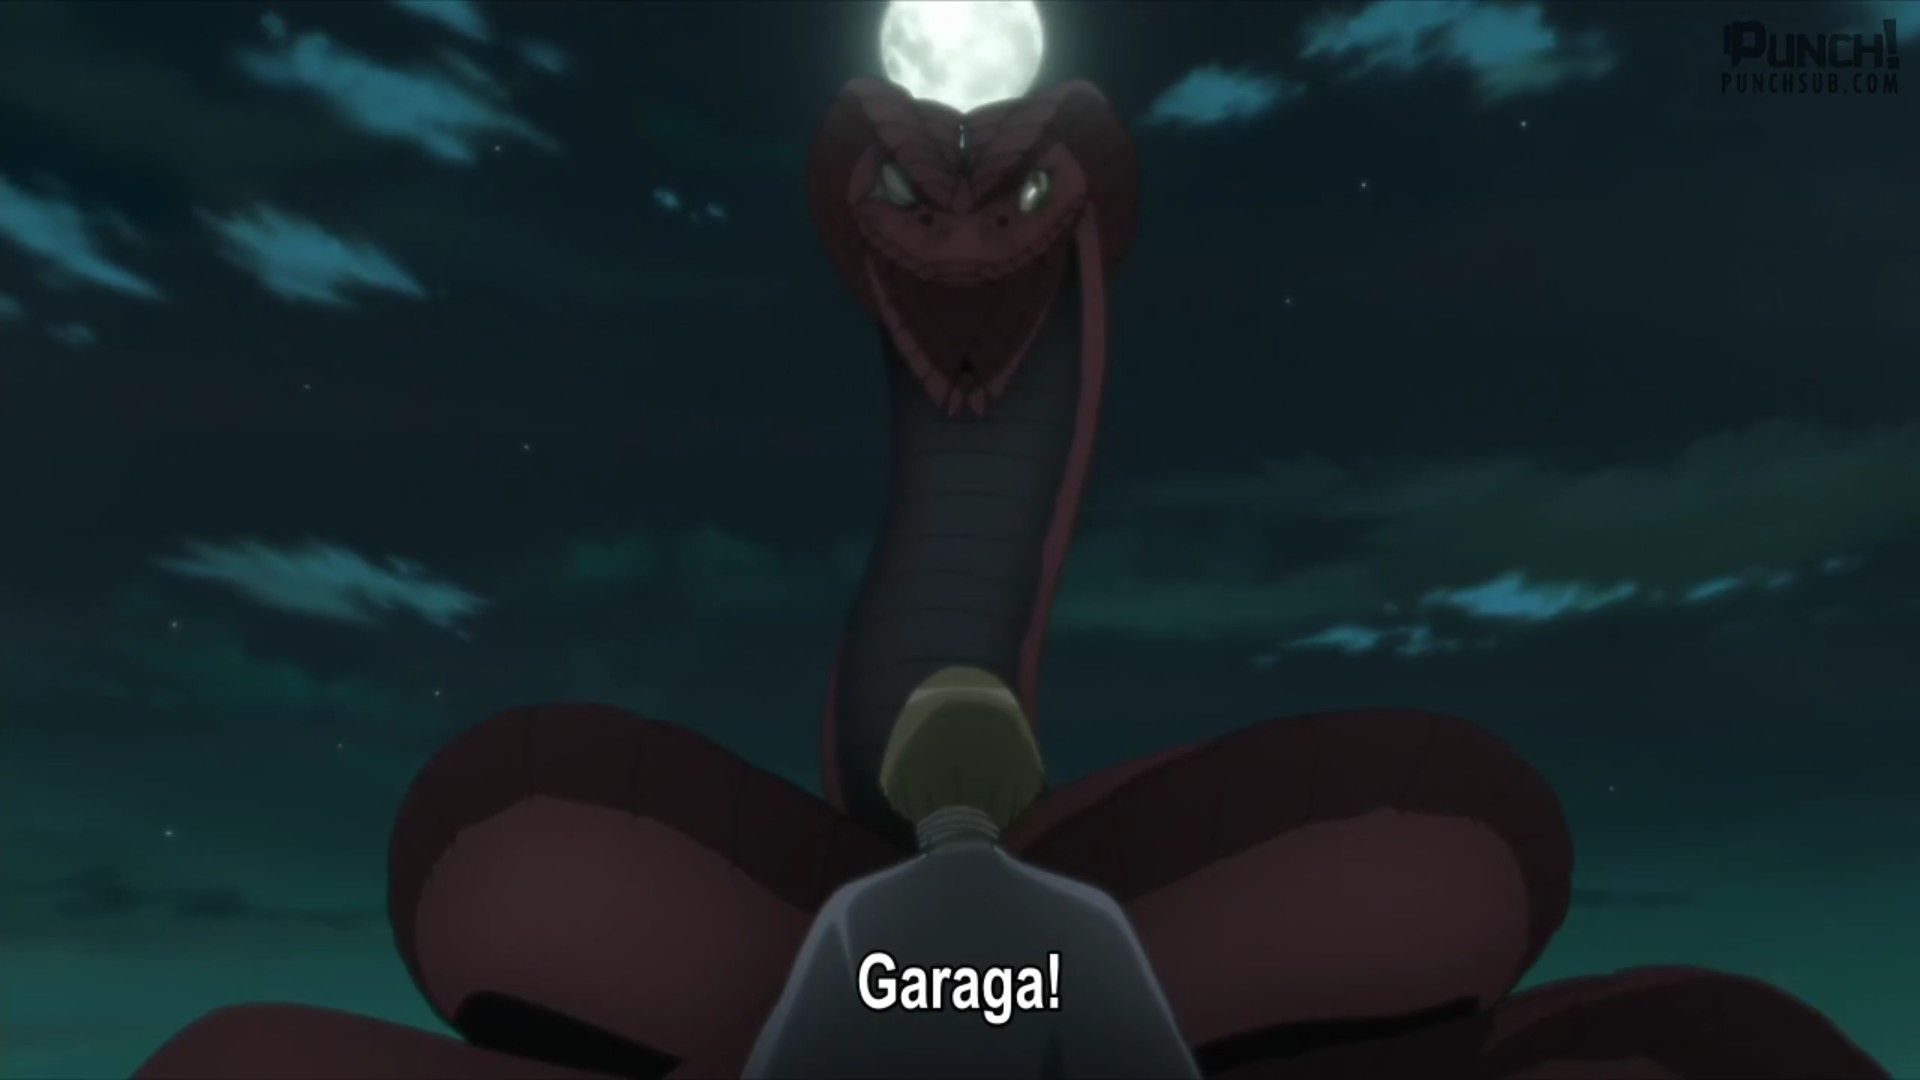 Boruto on top of head of Garaga during full moon facing Sekiei probably the coolest scene in anime!